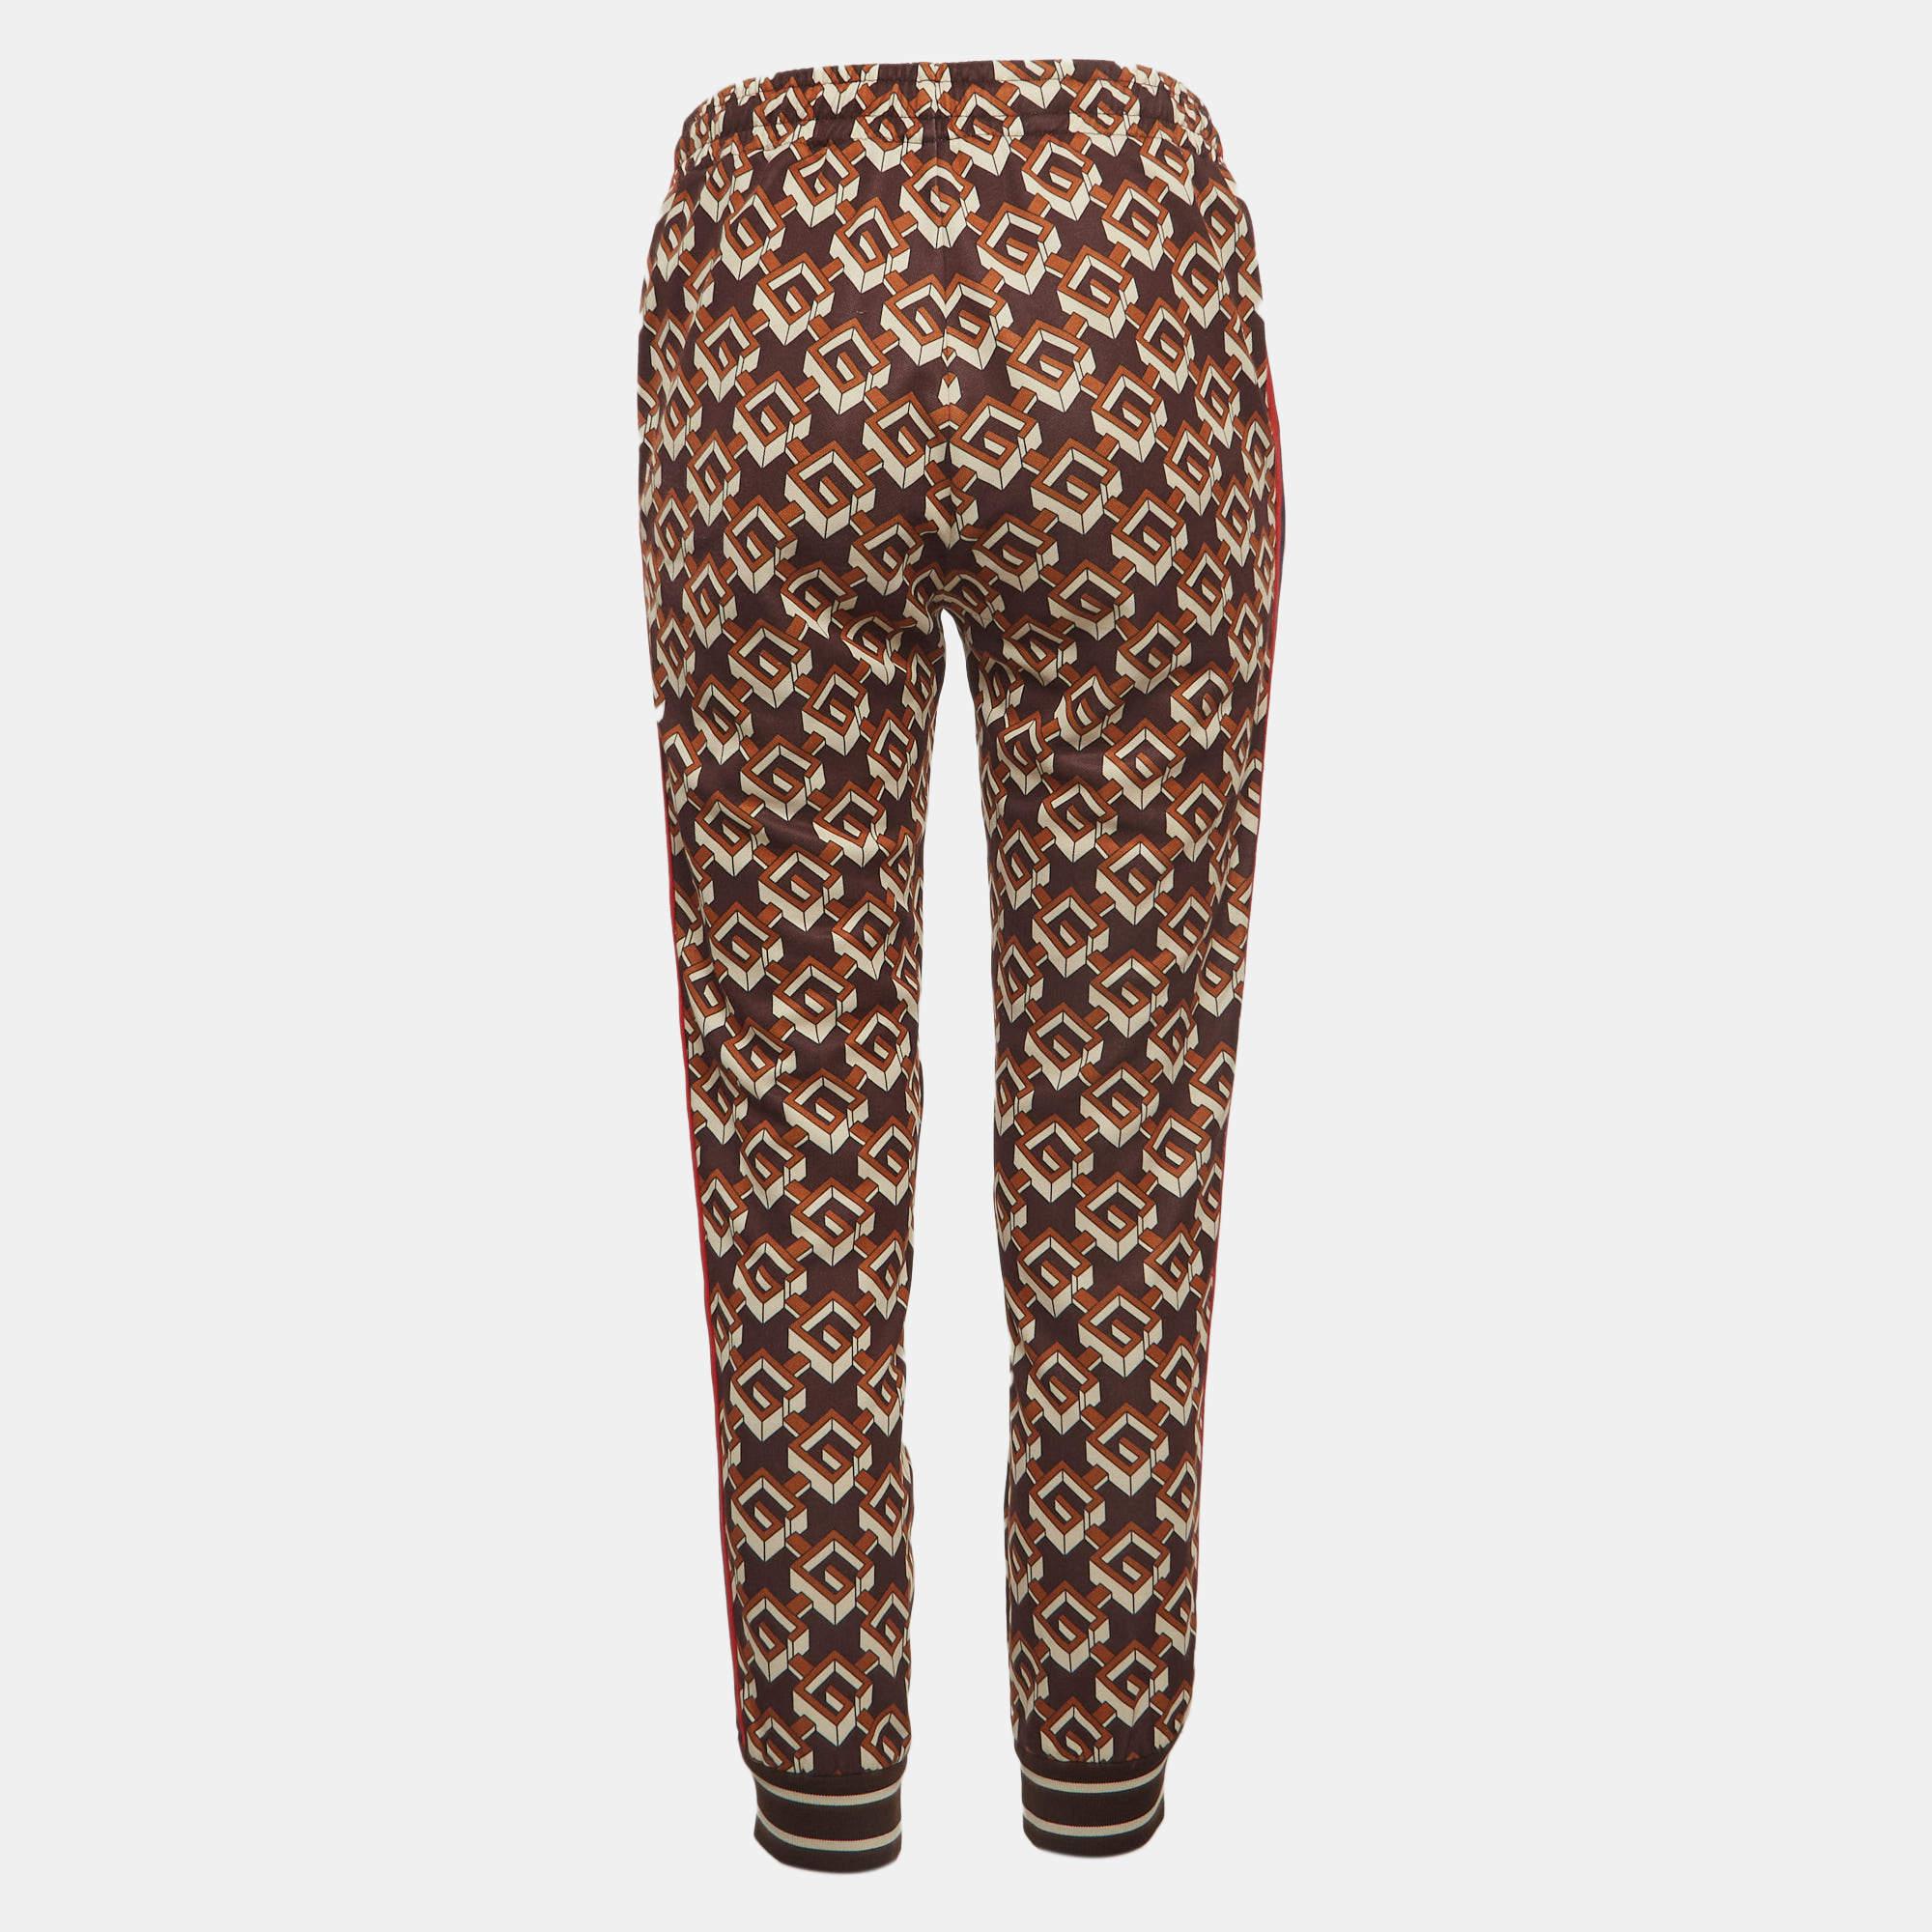 Lounge around in comfort and style with these joggers from Gucci. Made from a cotton blend, the pants have a comfortable elastic waistline, two pockets, and geometric G prints all over.

